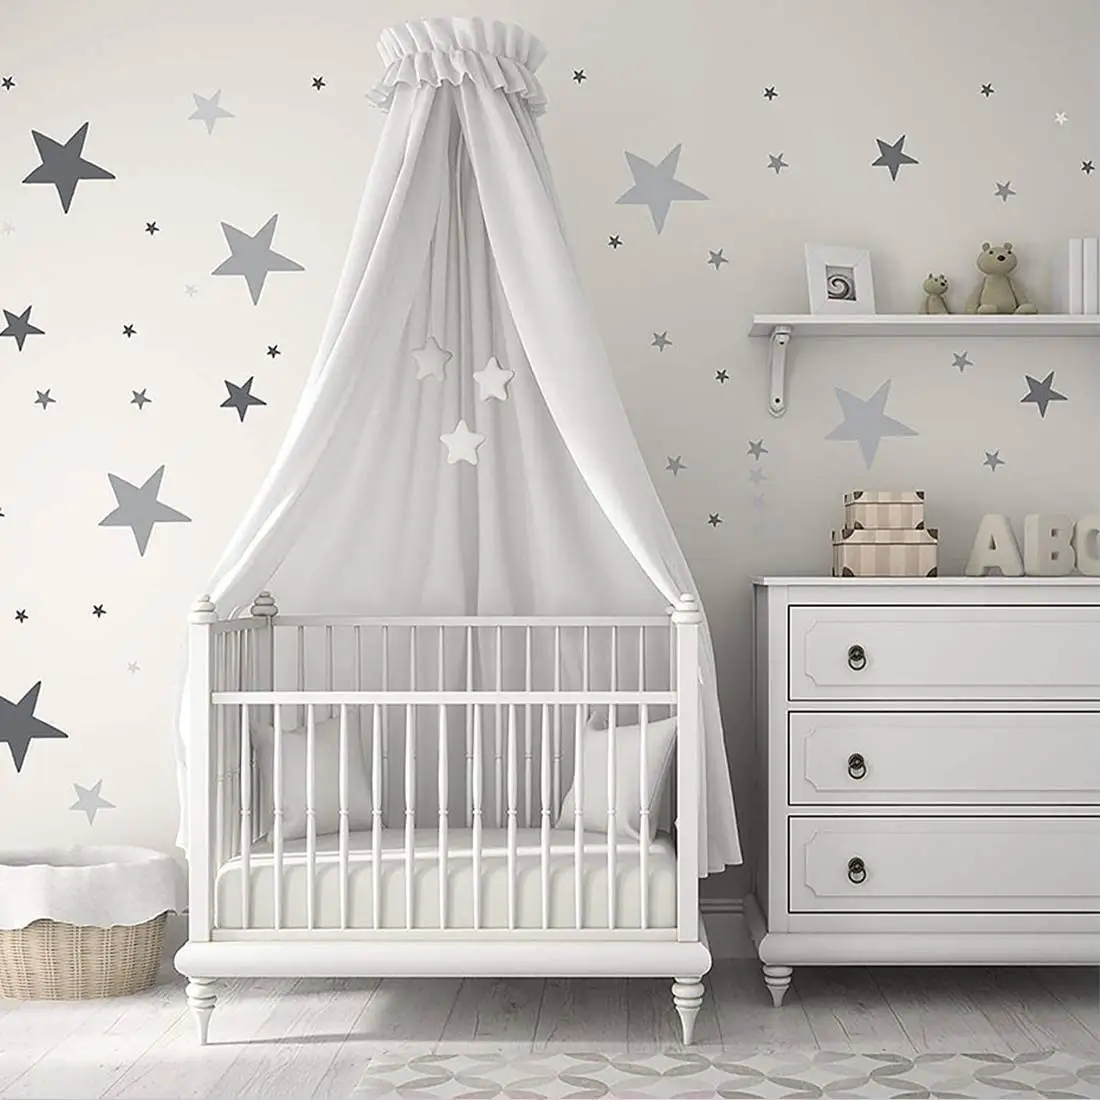 124 Pieces Sticker Set Colours Baby Starry Sky Sticker Wall Decoration for Bedroom Wall Decal Sticker Set